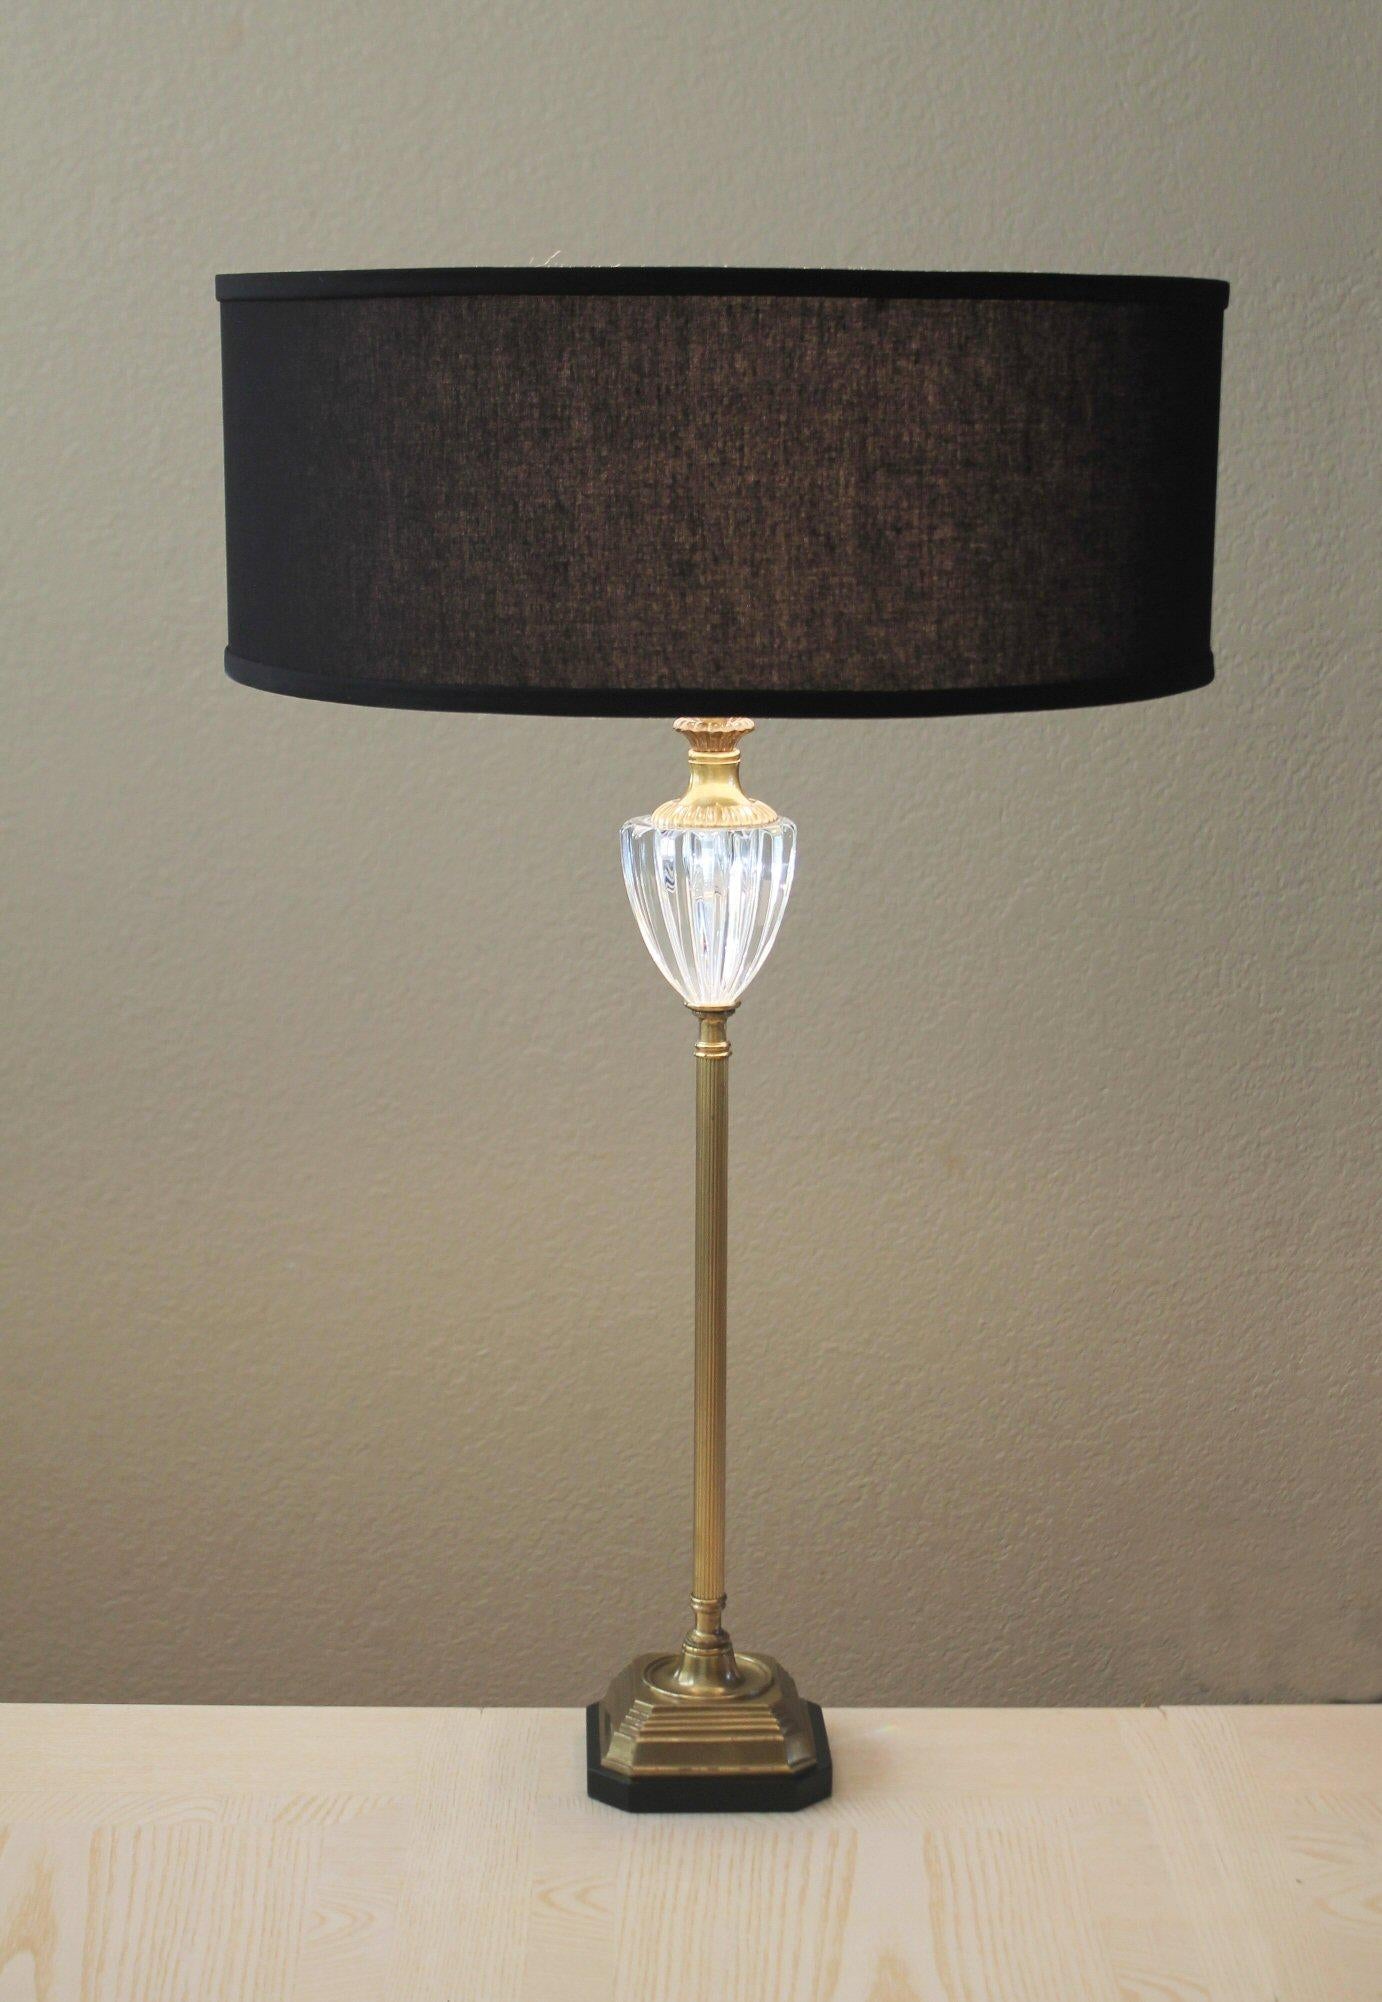 American Gorgeous FREDERICK COOPER Crystal Table Lamp 1970's Hollywood Regency Decor For Sale